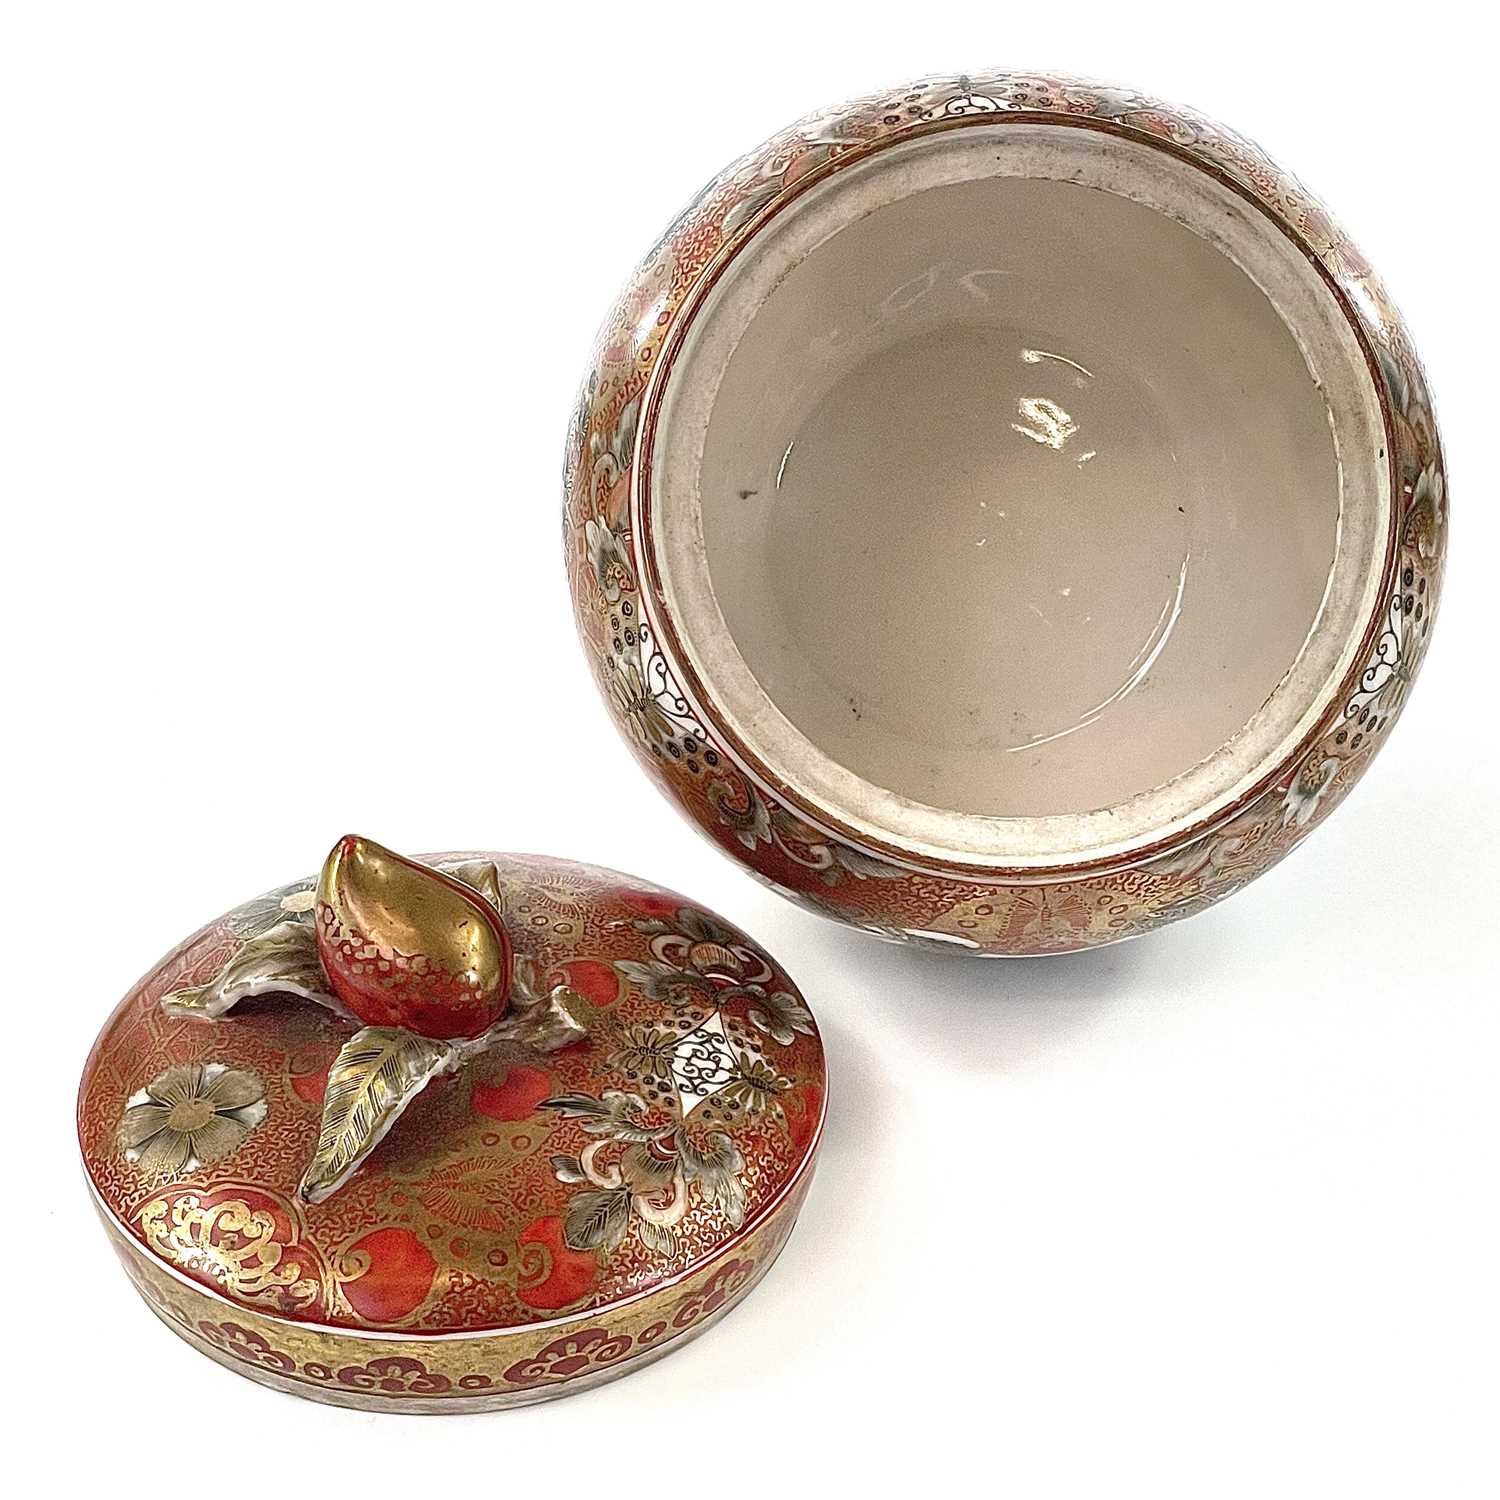 A Japanese kutani porcelain jar and cover, 19th century, signed, with three cartouches filled with - Image 10 of 10